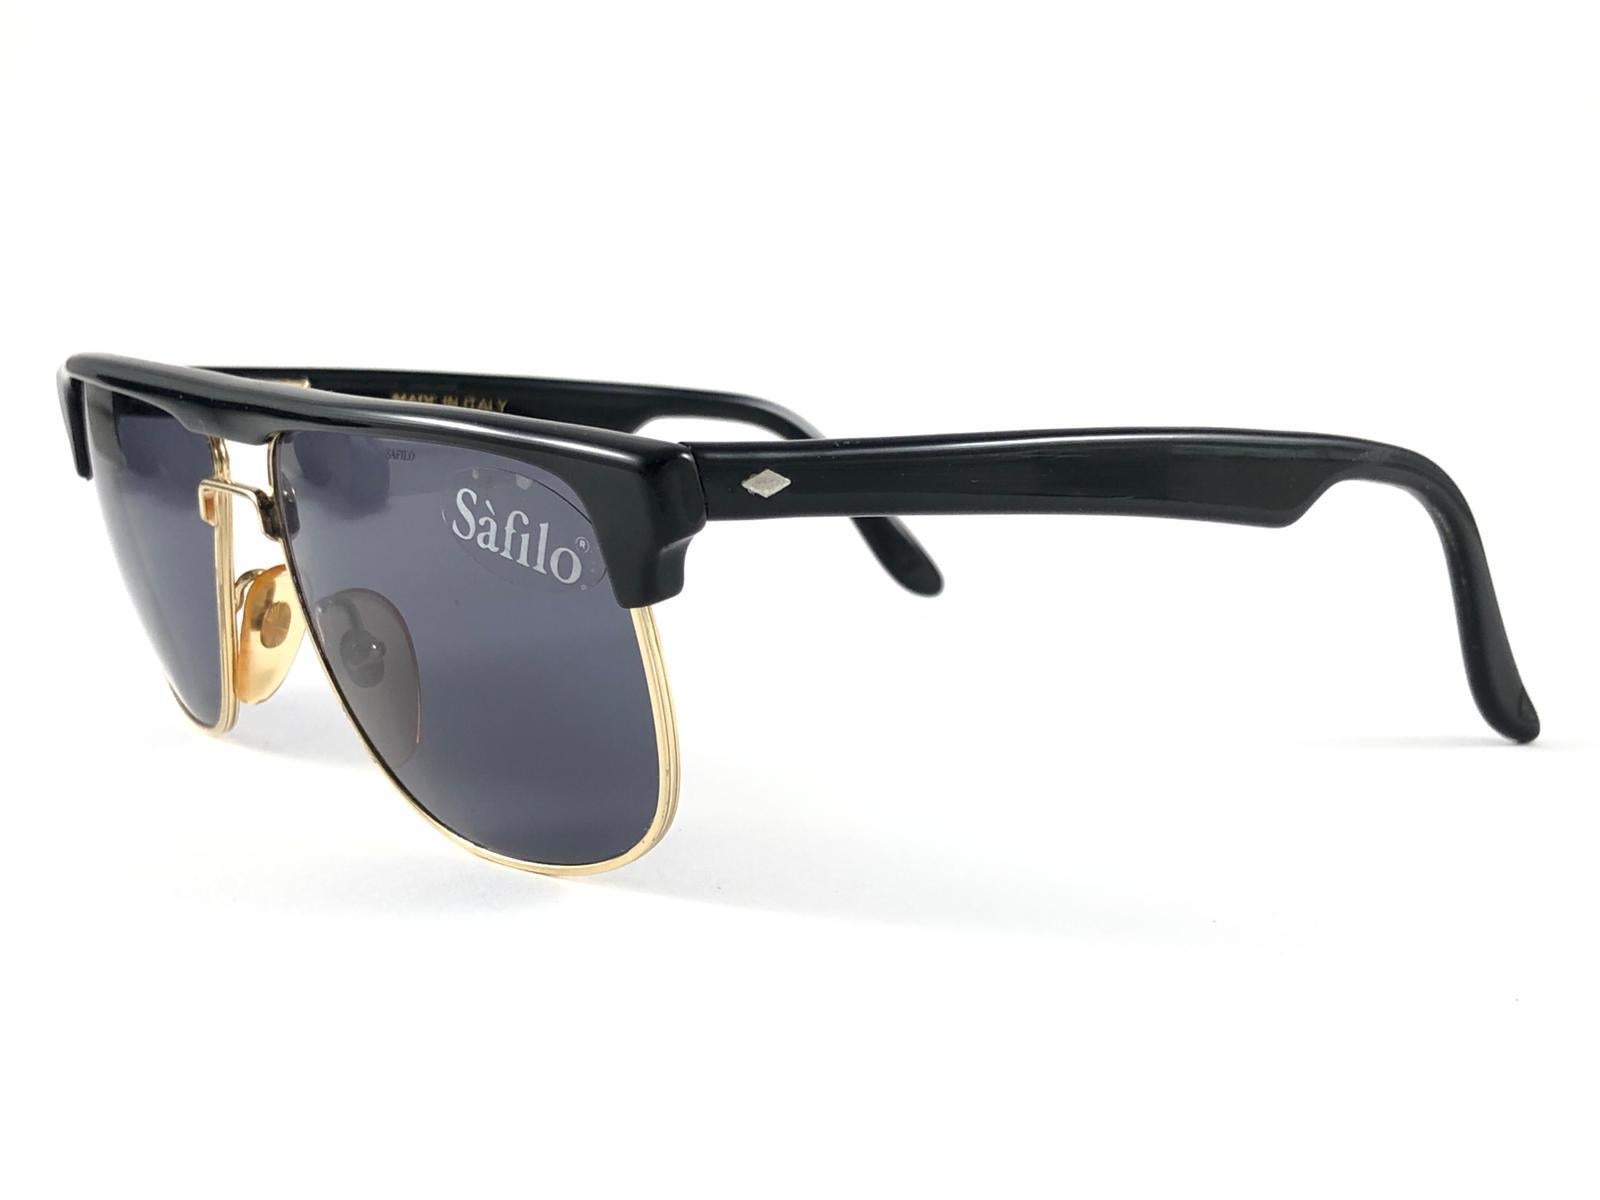 New Vintage Safilo, a balanced combination of Italian craftsmanship, design, functionality and striking aesthetics, this model showcases a black and gold frame and holds a grey lenses

New, never worn or displayed.
Made in Italy.

Measurements 